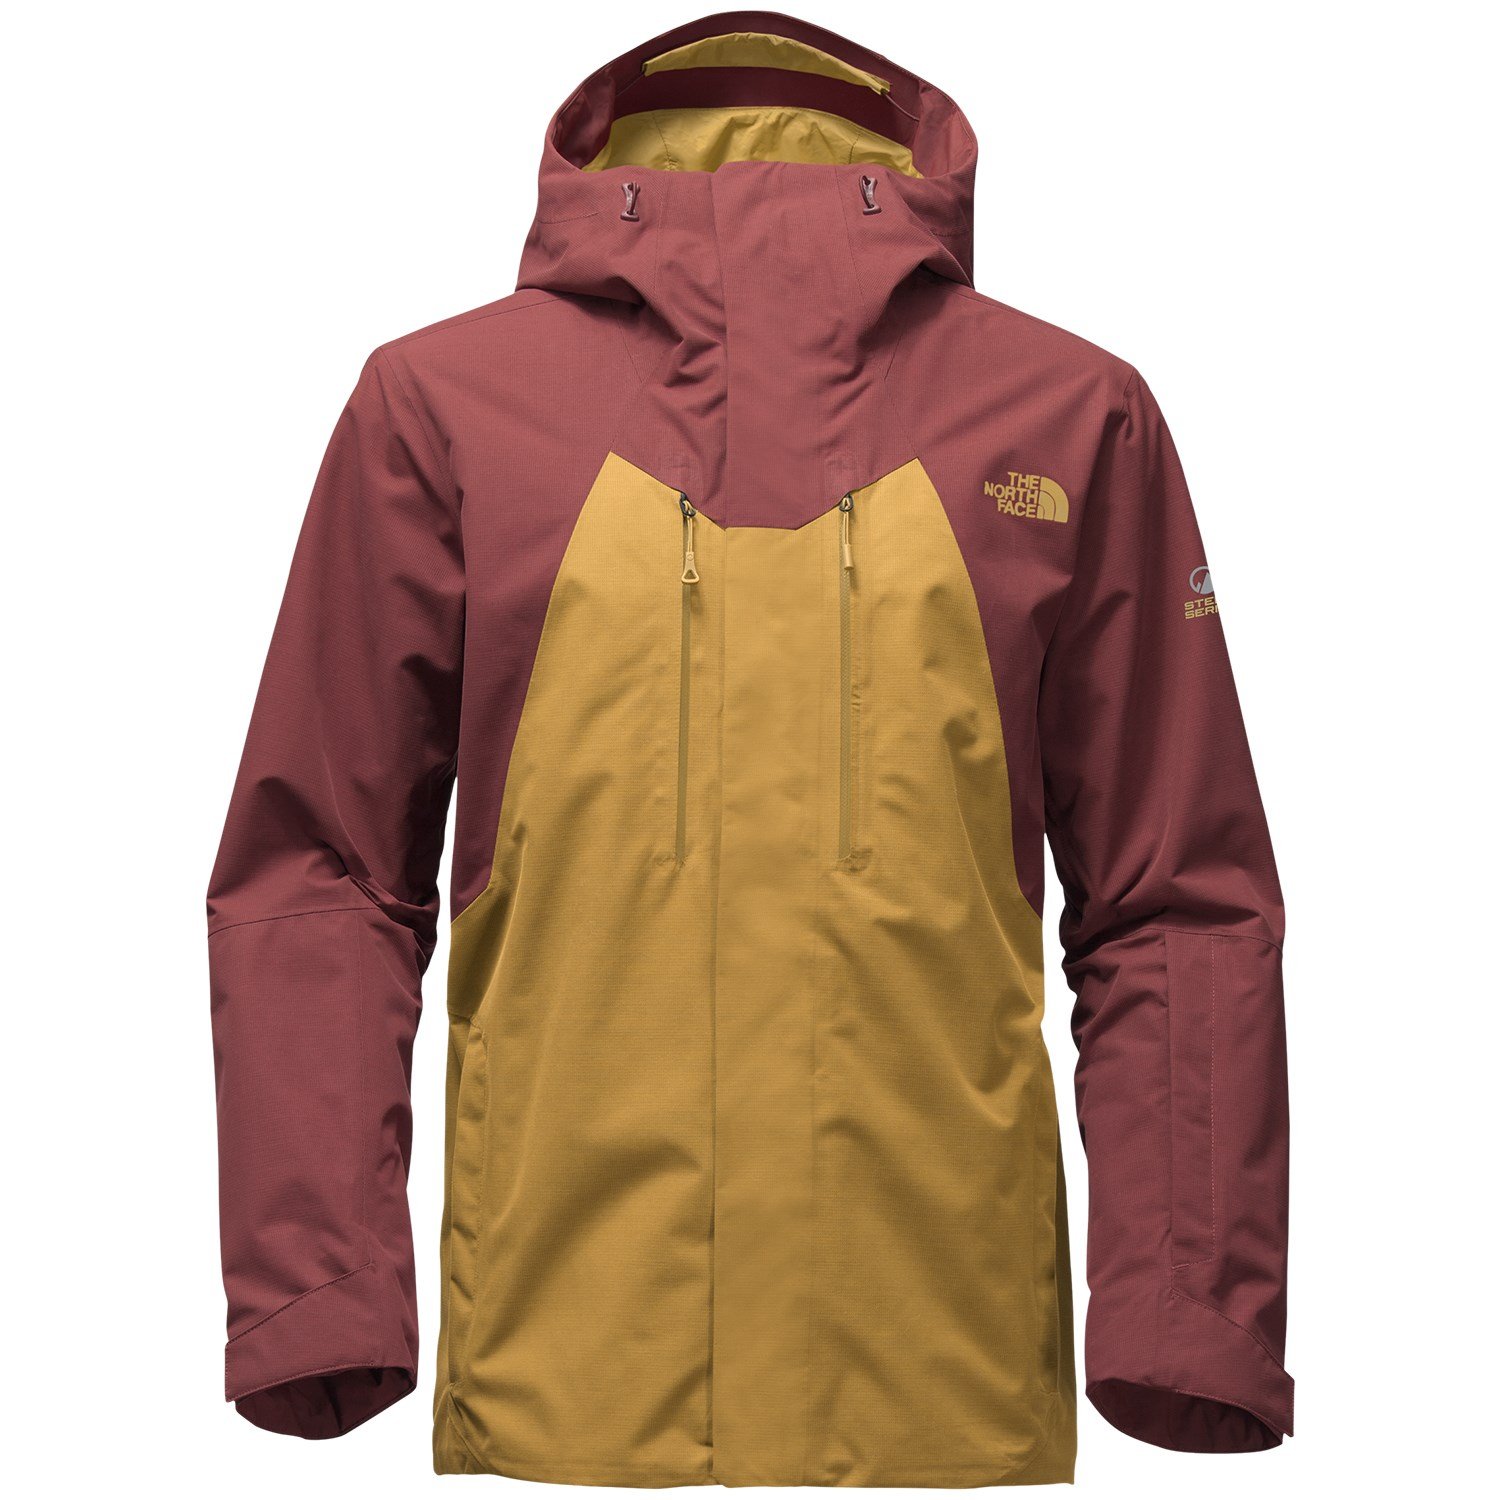 The North Face NFZ Jacket | evo